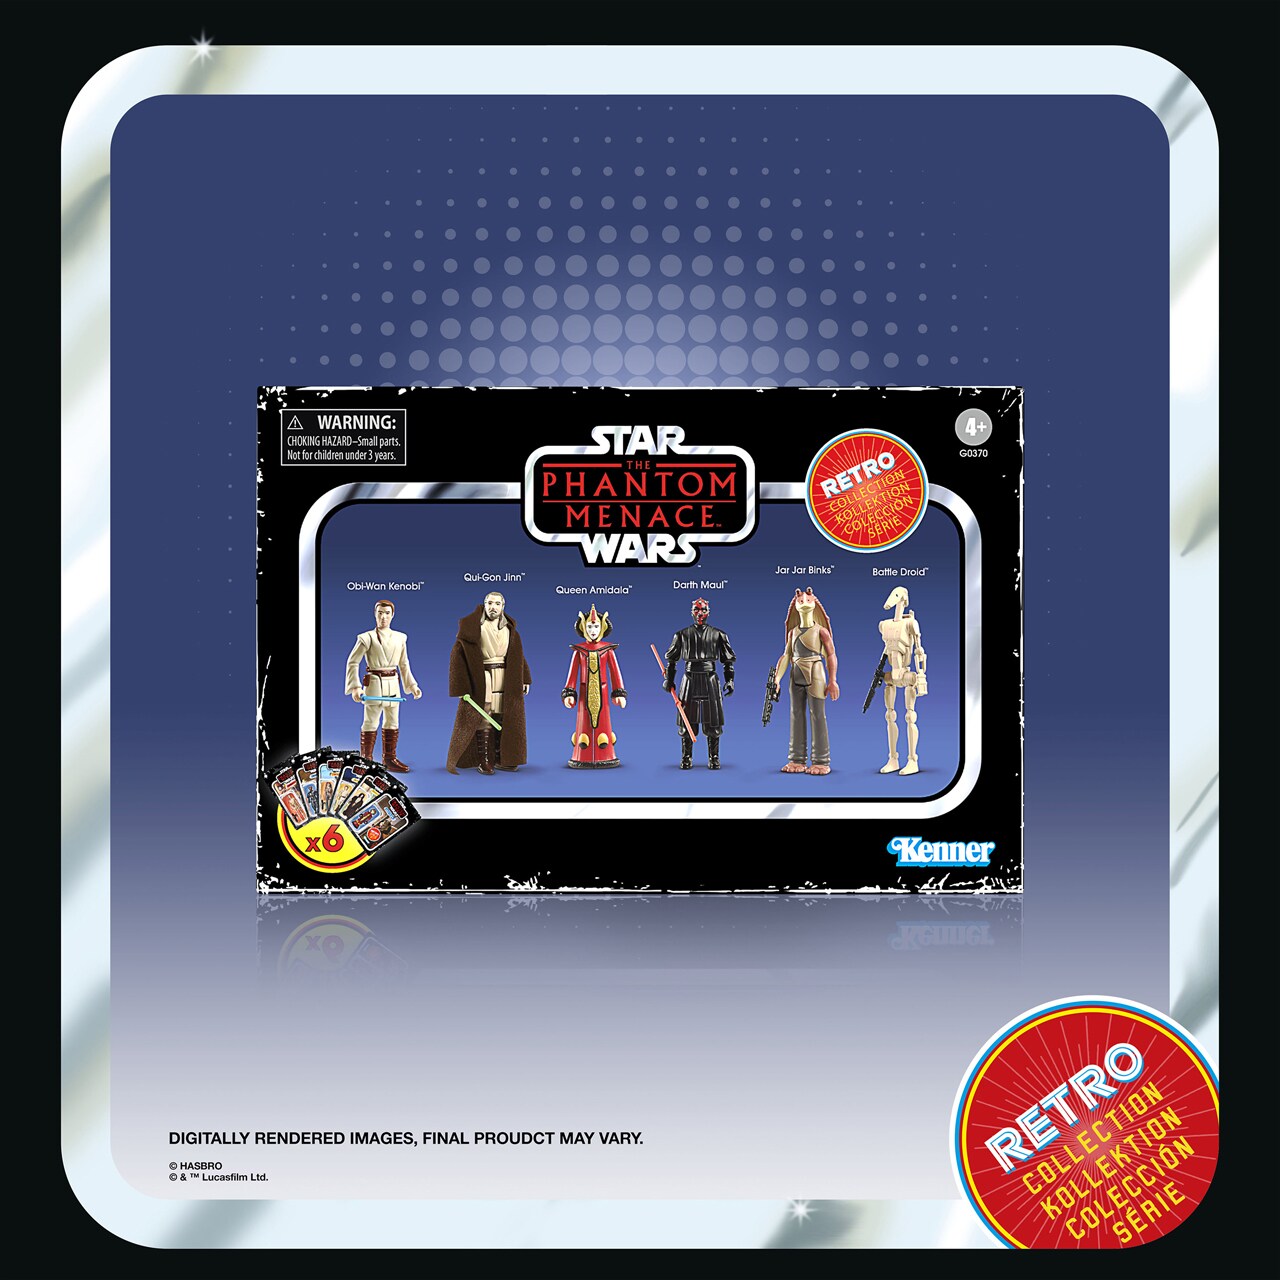 Star Wars: The Phantom Menace Retro Collection Multipack by Hasbro